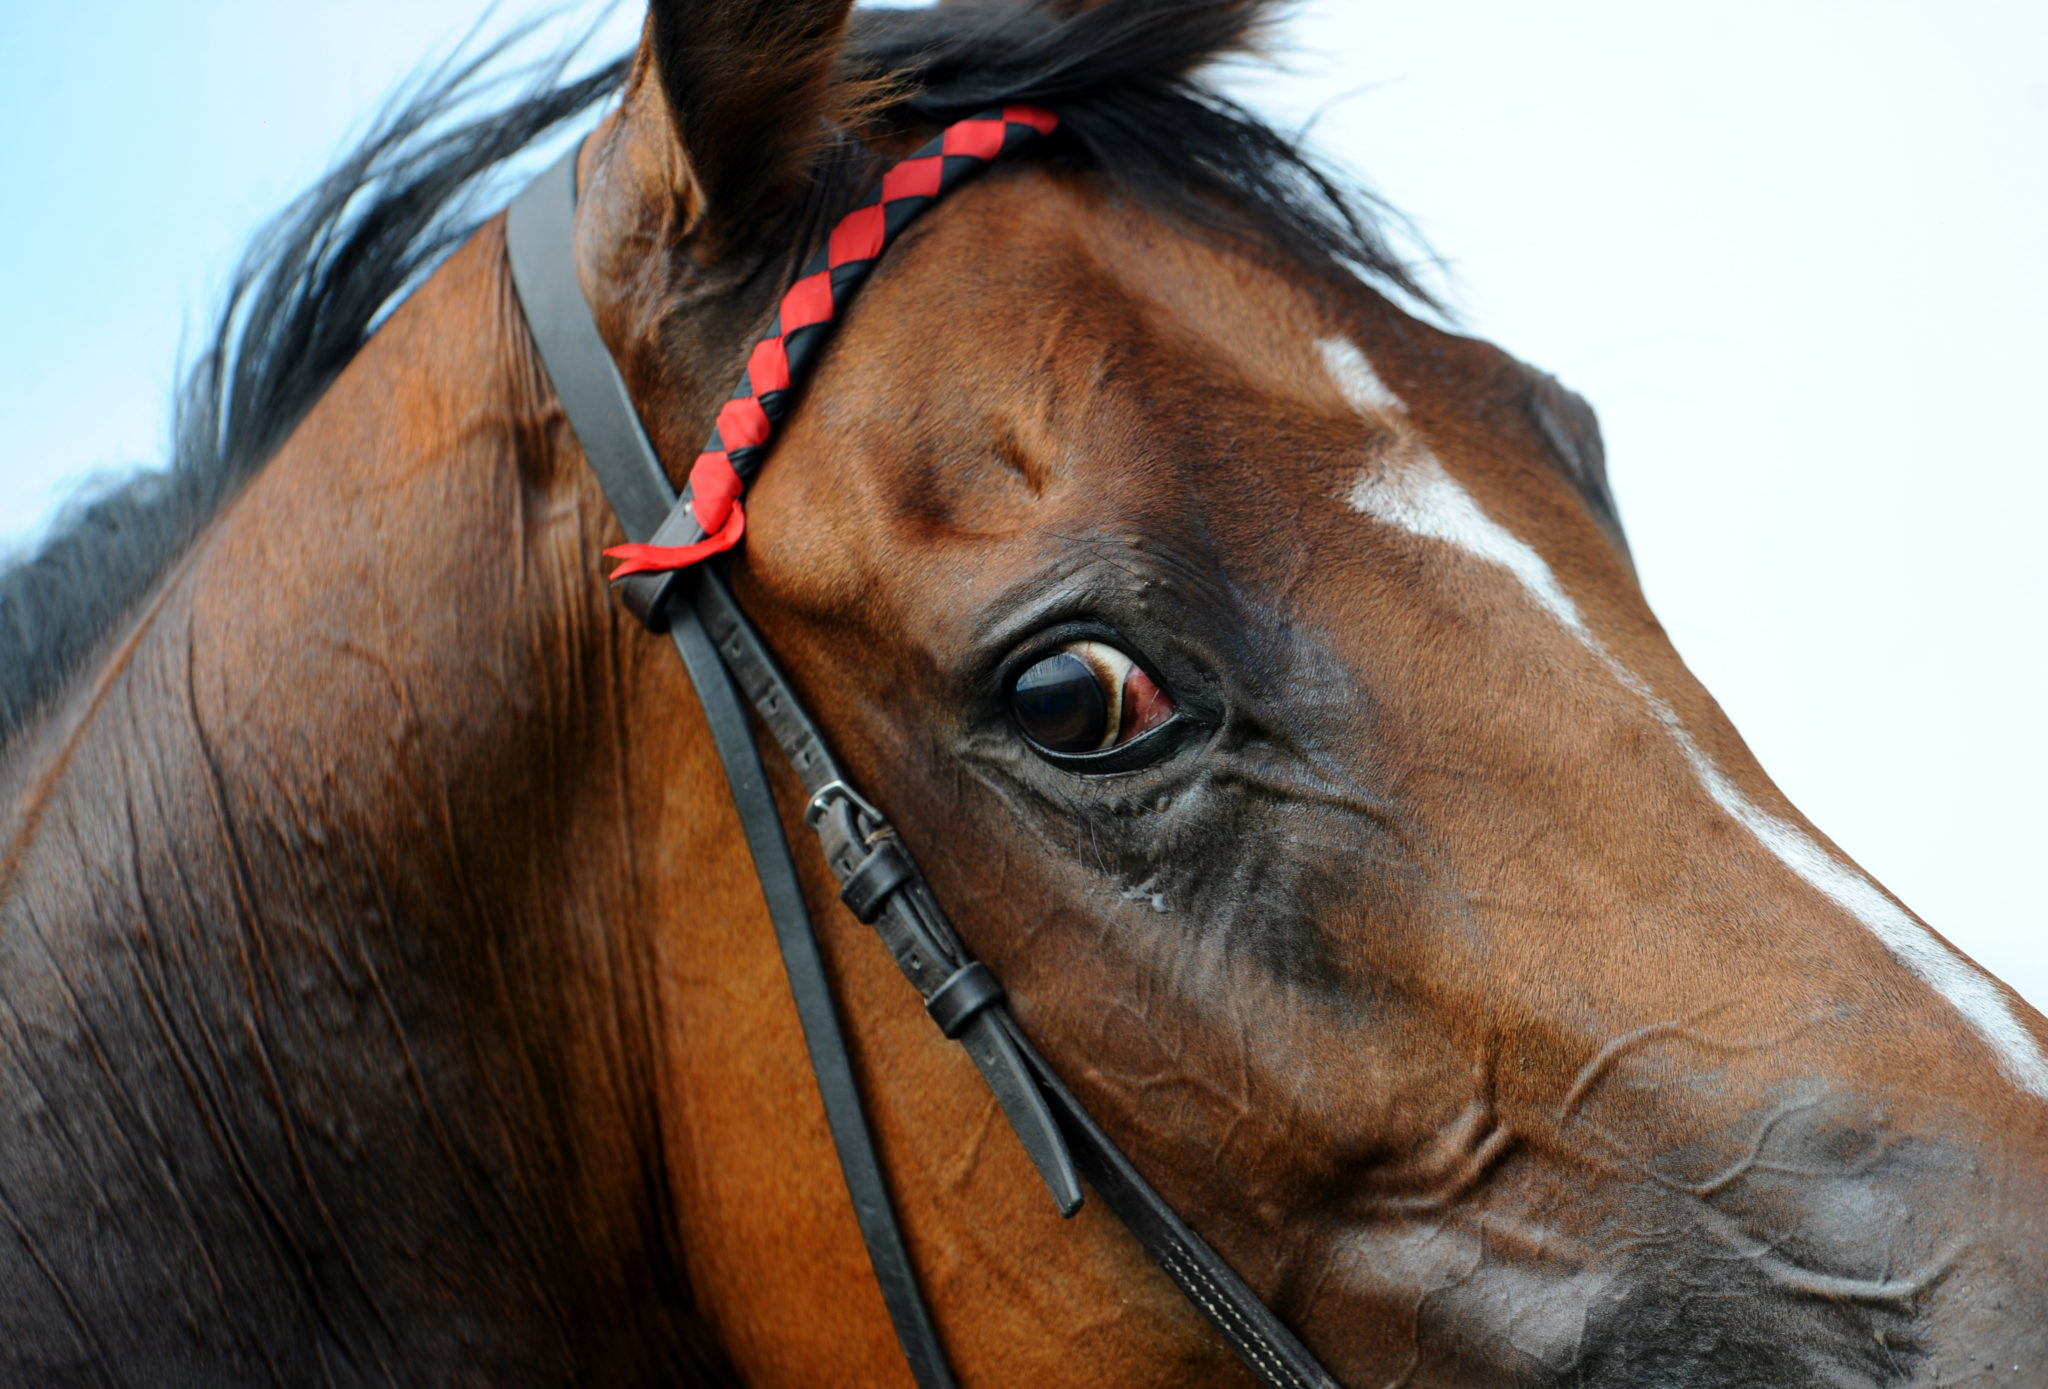 A close up of a horse's face, 31-8-09